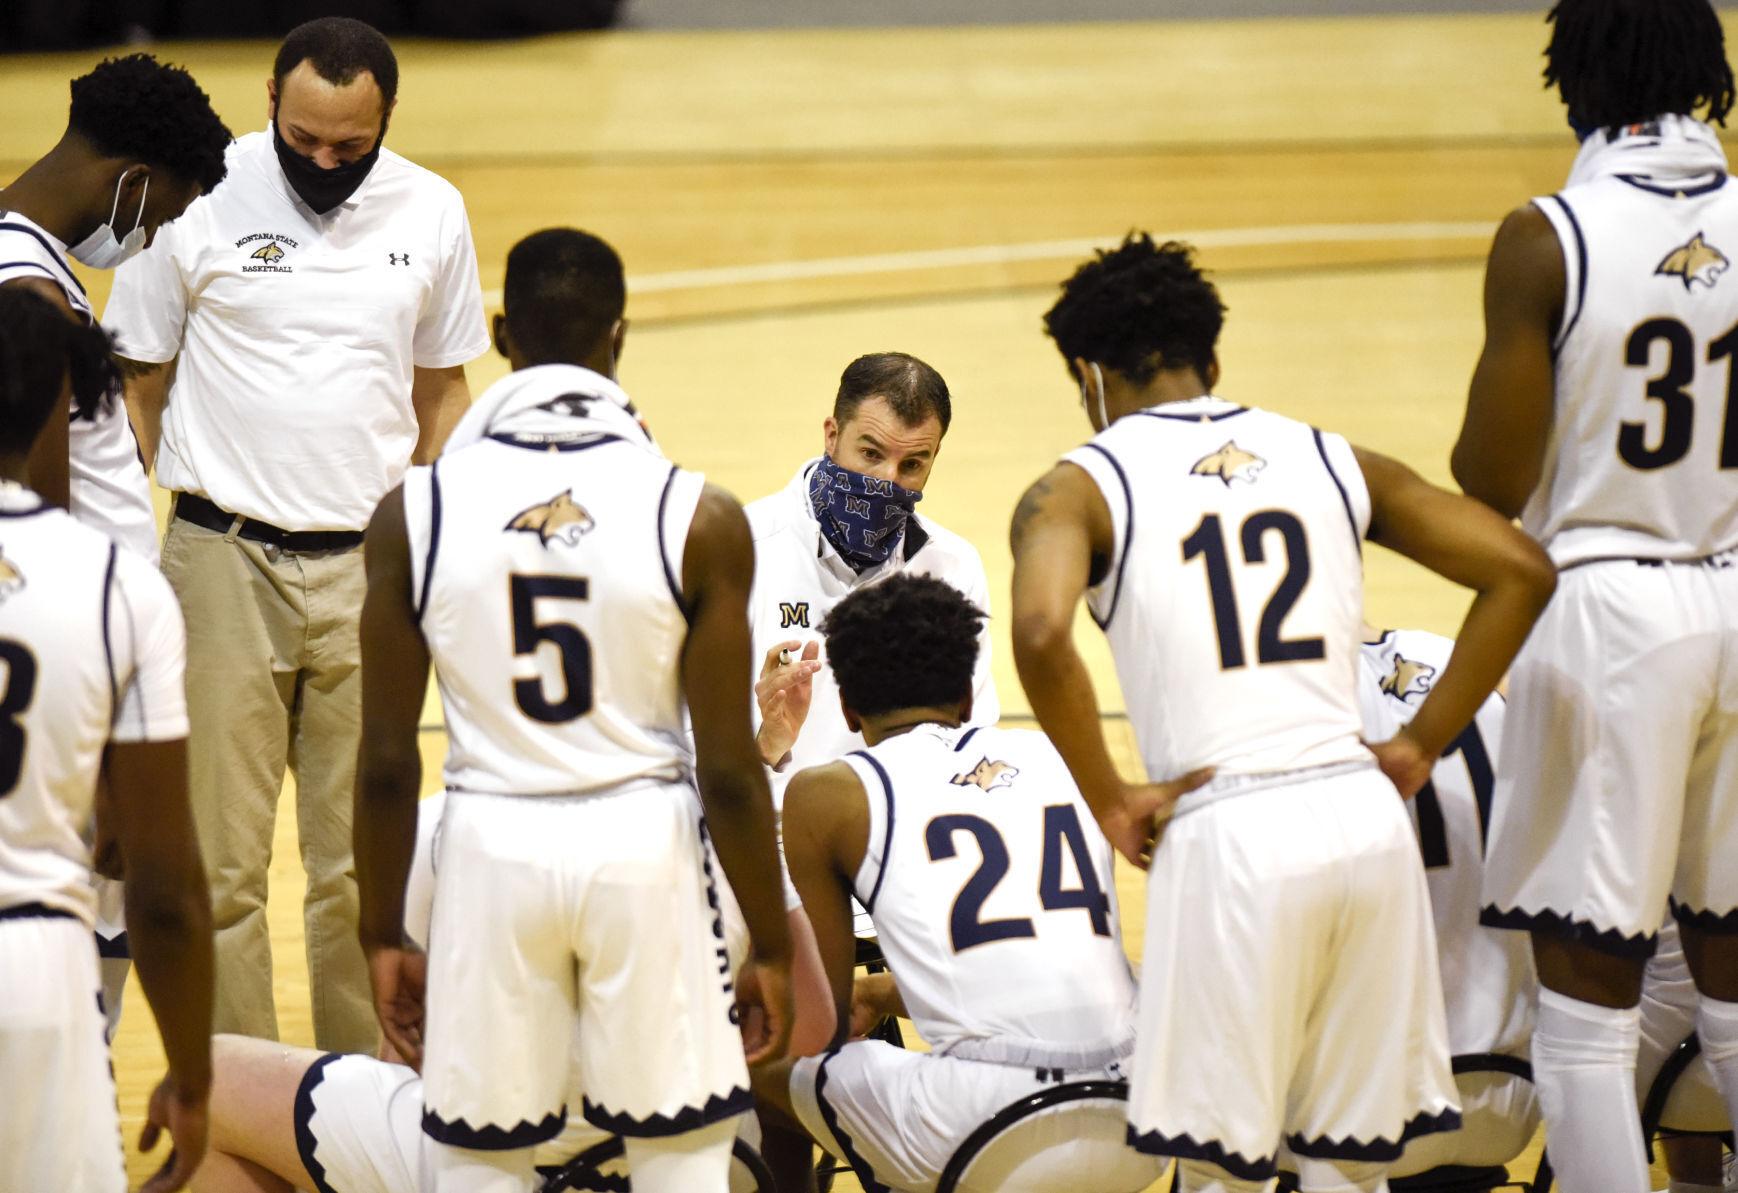 Montana State men's basketball 202122 conference schedule released